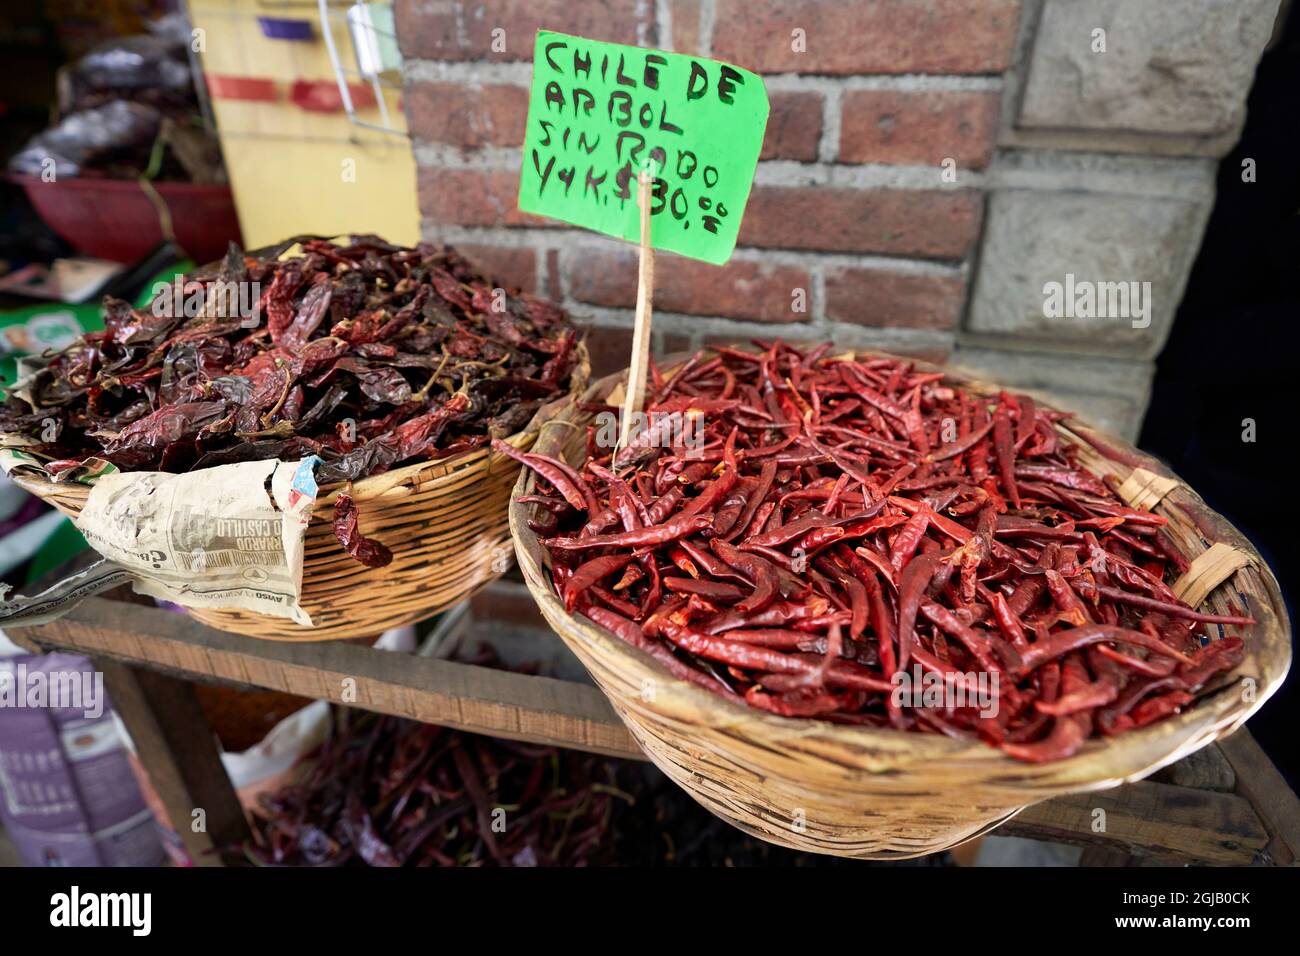 Mexico, Oaxaca. Benito Juarez Market. Several hundred stalls offer food, clothing, mezcal, handicrafts and souvenirs. Dried chilies for sale. Green si Stock Photo